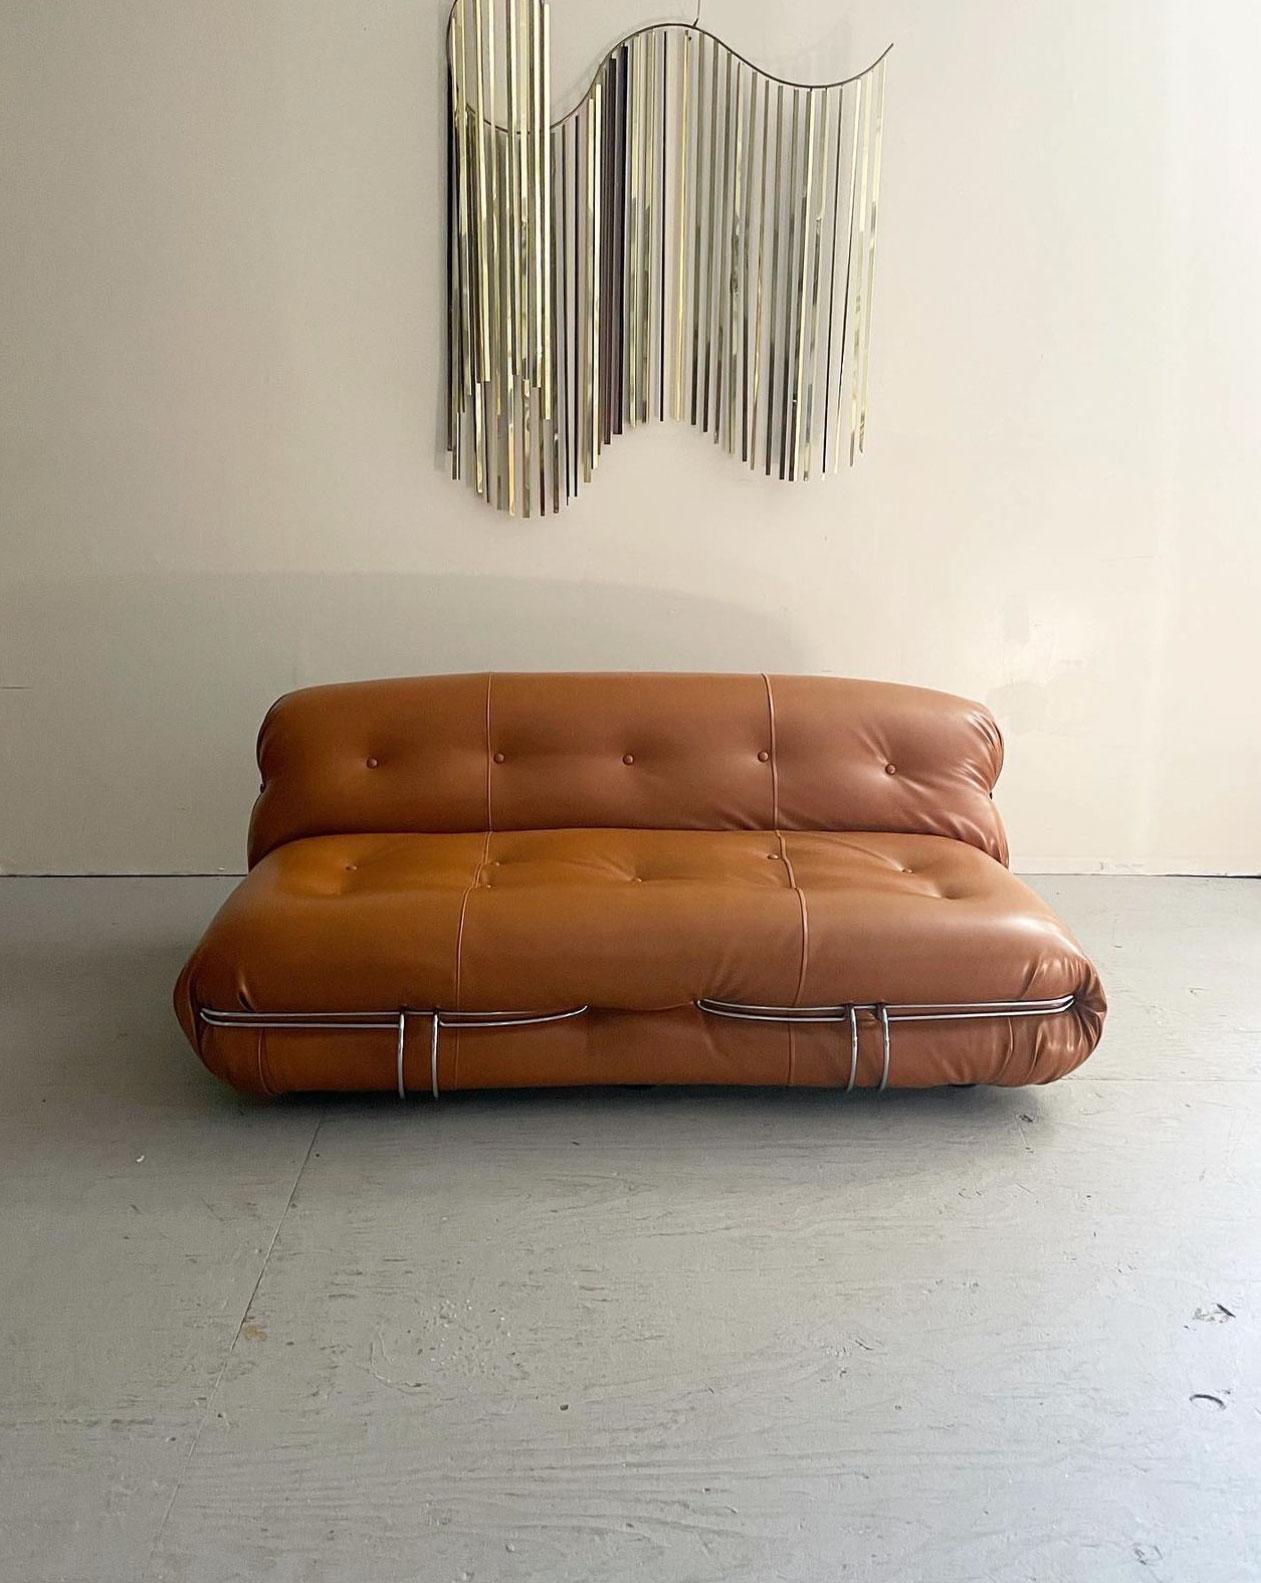 Space Age Modern “Soriana” Sofa Designed by Tobia & Afra Scarpa. Newly reupholstered cognac leather & foam. This sofa comfortably fits 3 people. Made in Italy, circa 1960.